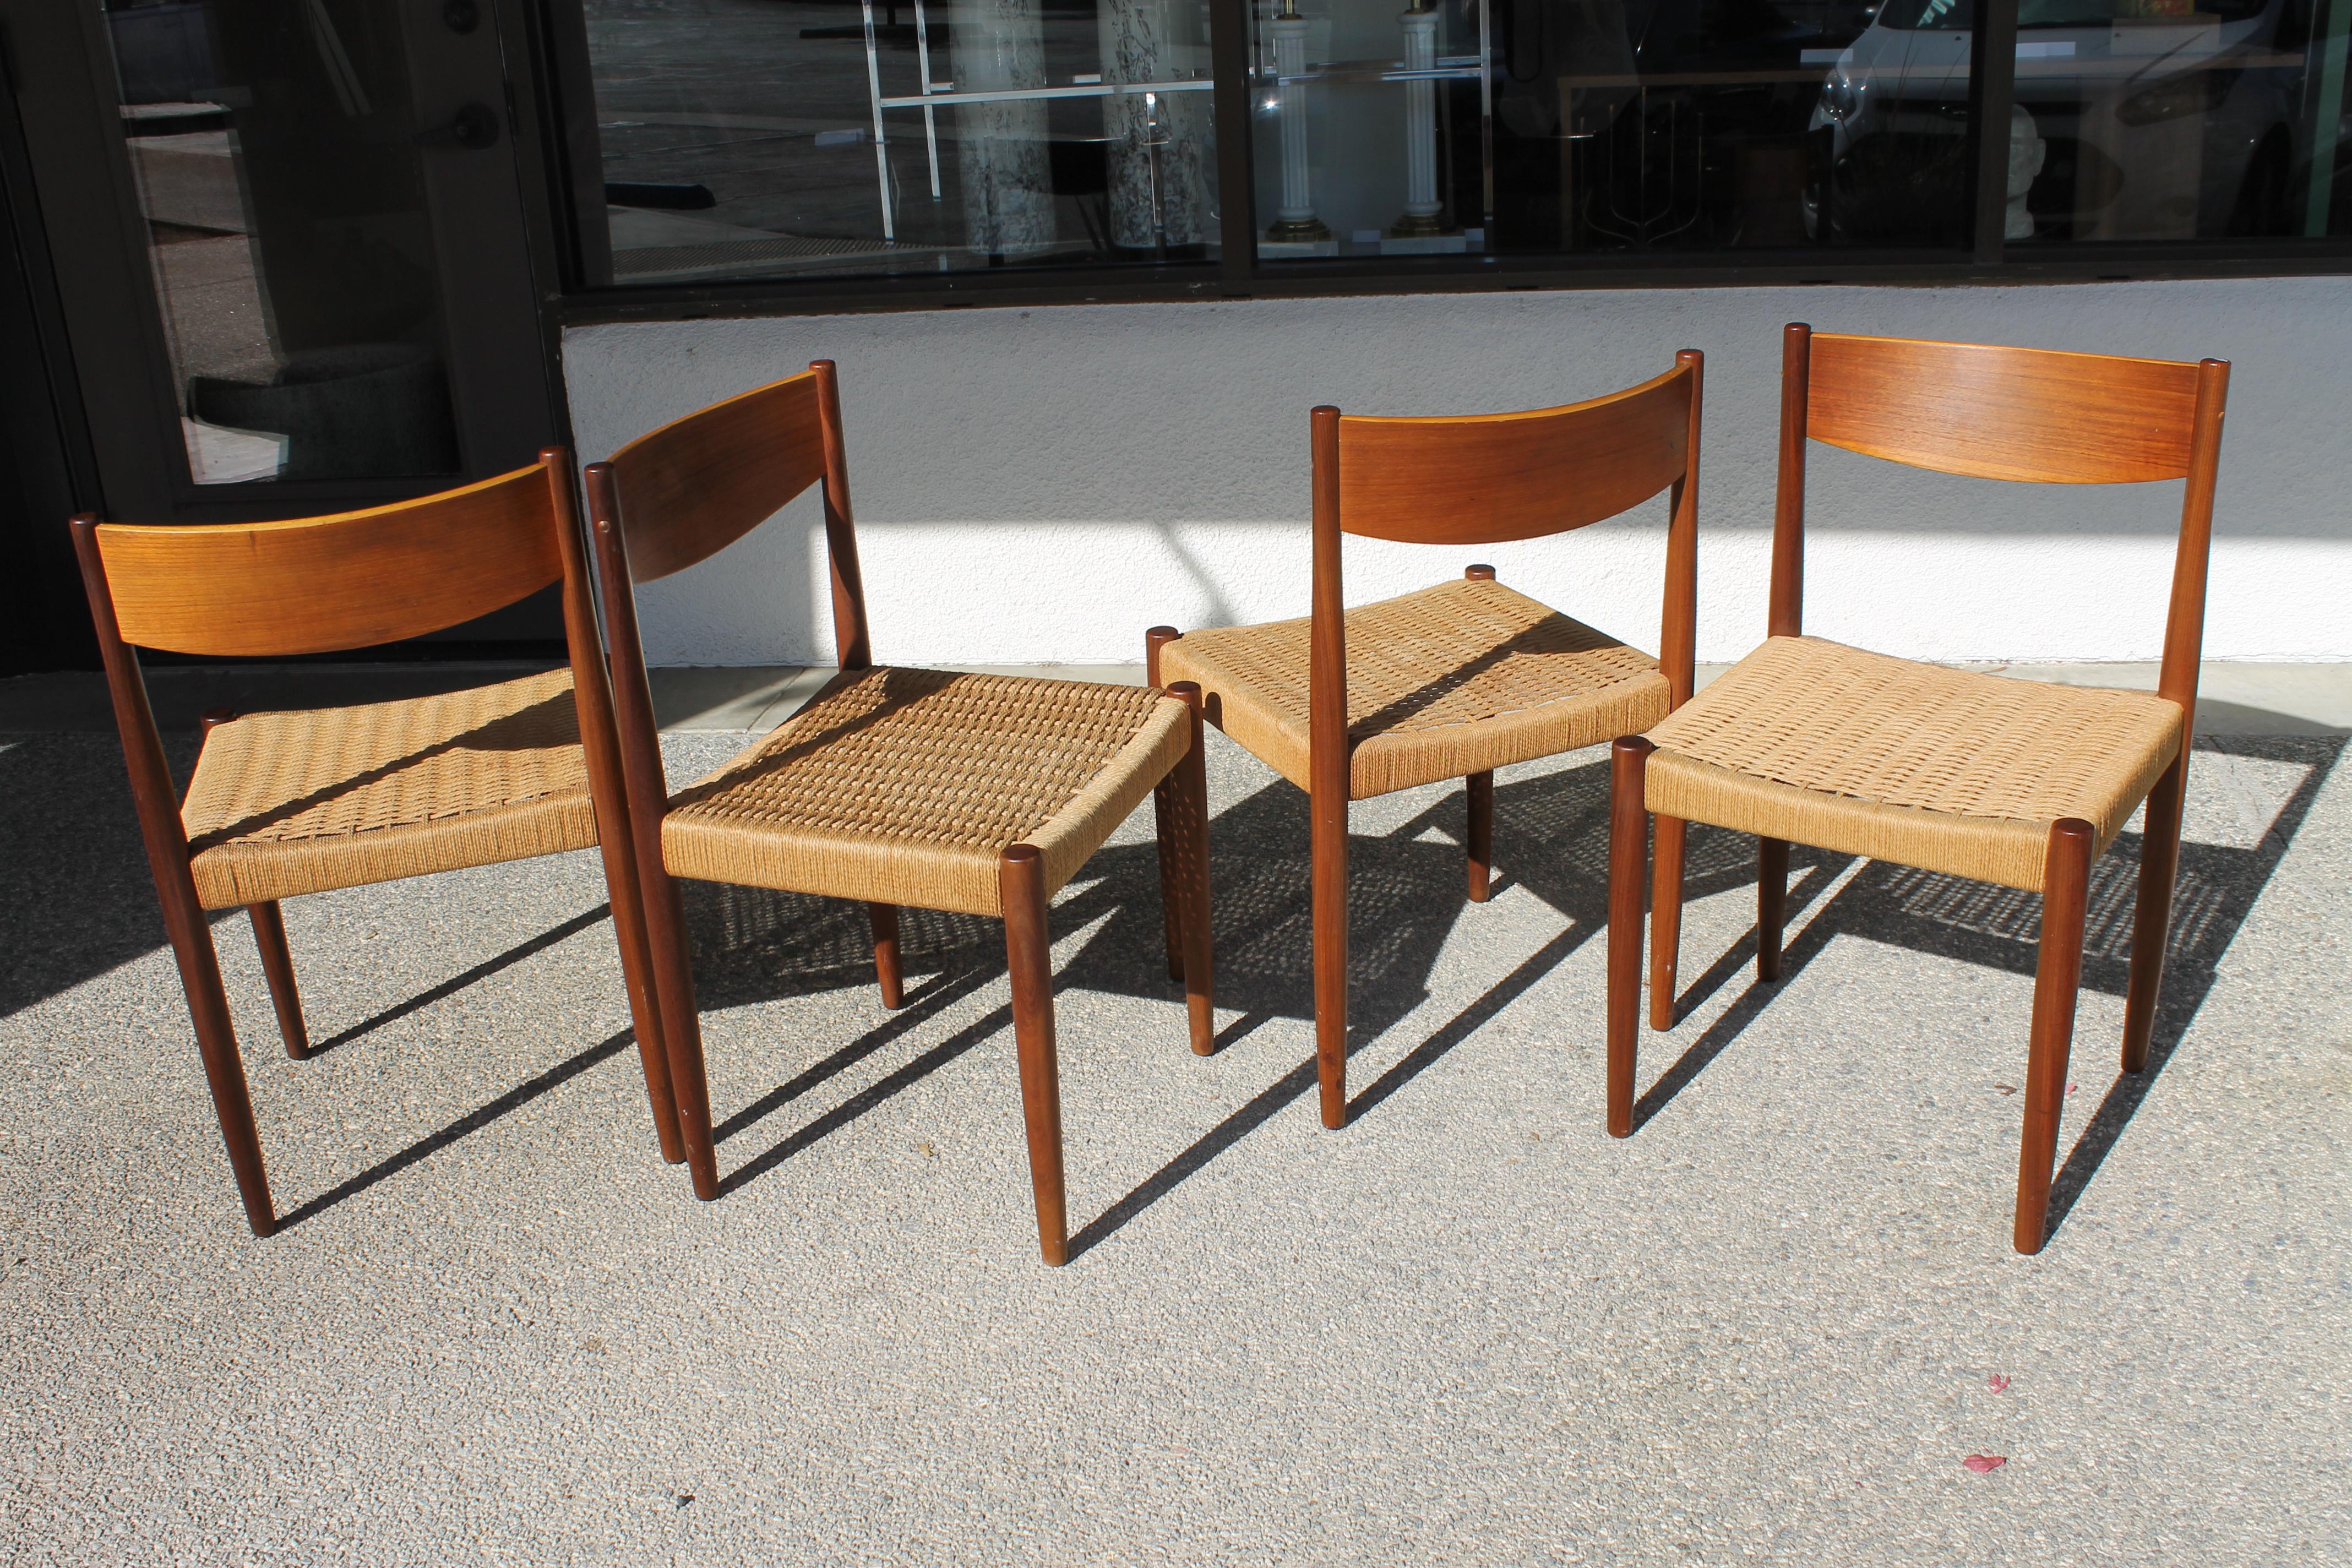 Four danish dining chairs possibly designed by Danish designer Niels Moller. Label says FurnitureMakers Danish Control. Each chair measures 18.5